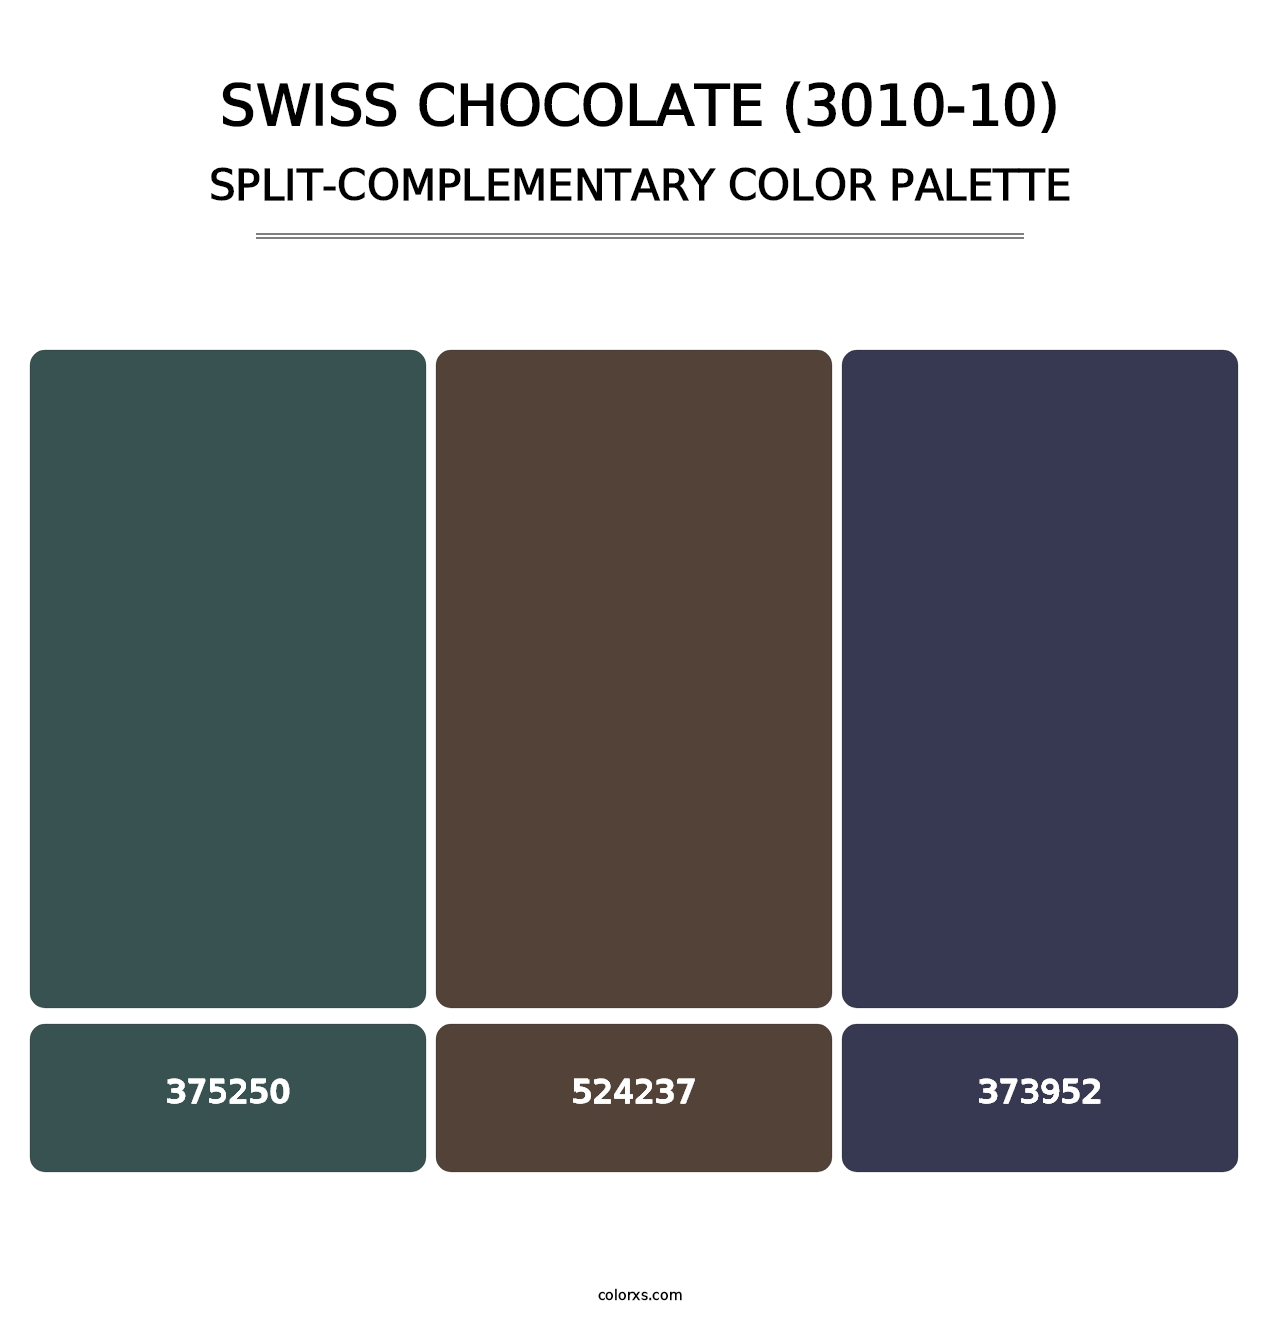 Swiss Chocolate (3010-10) - Split-Complementary Color Palette